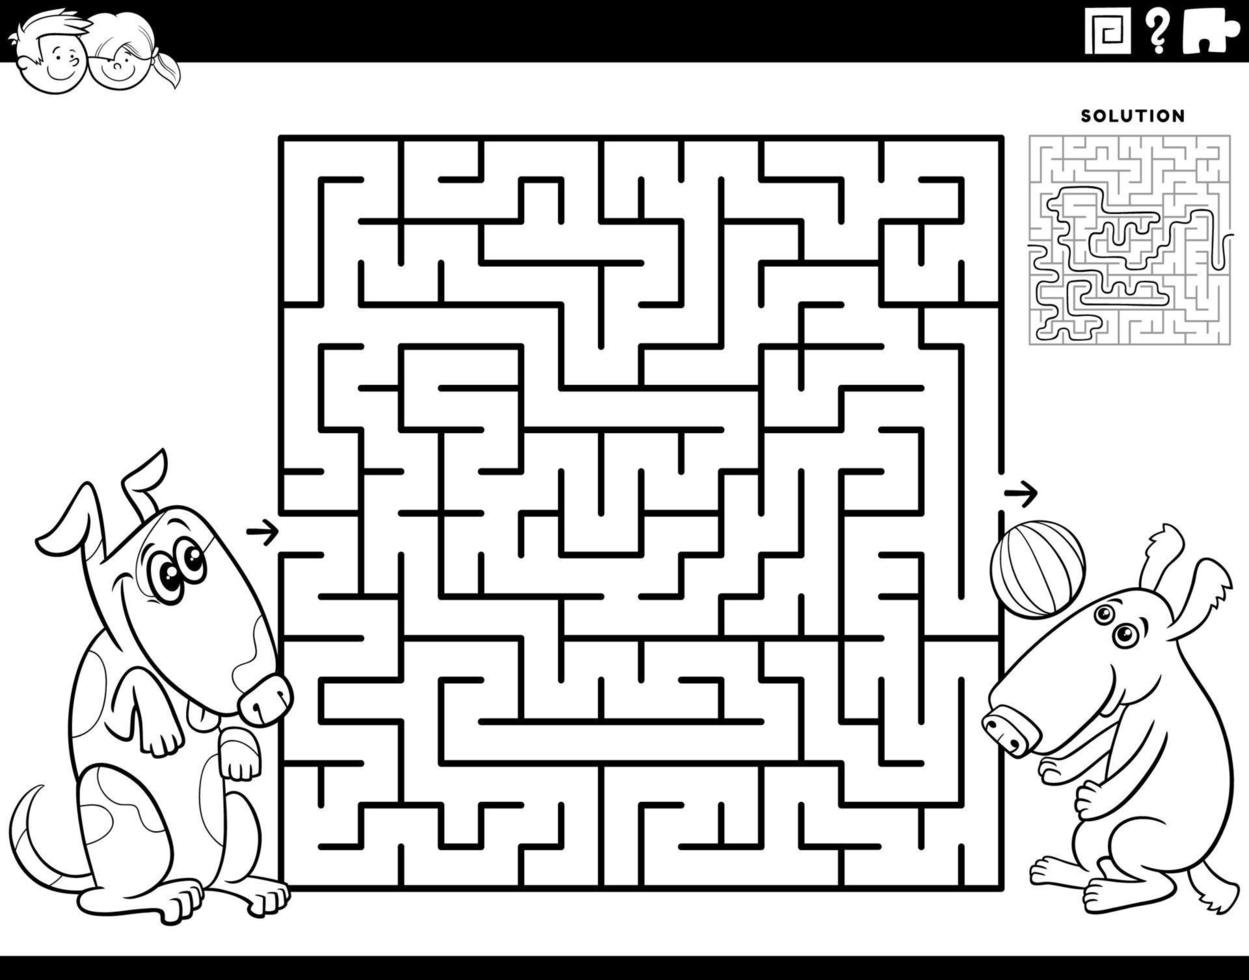 maze game with two cartoon playful dogs coloring page vector